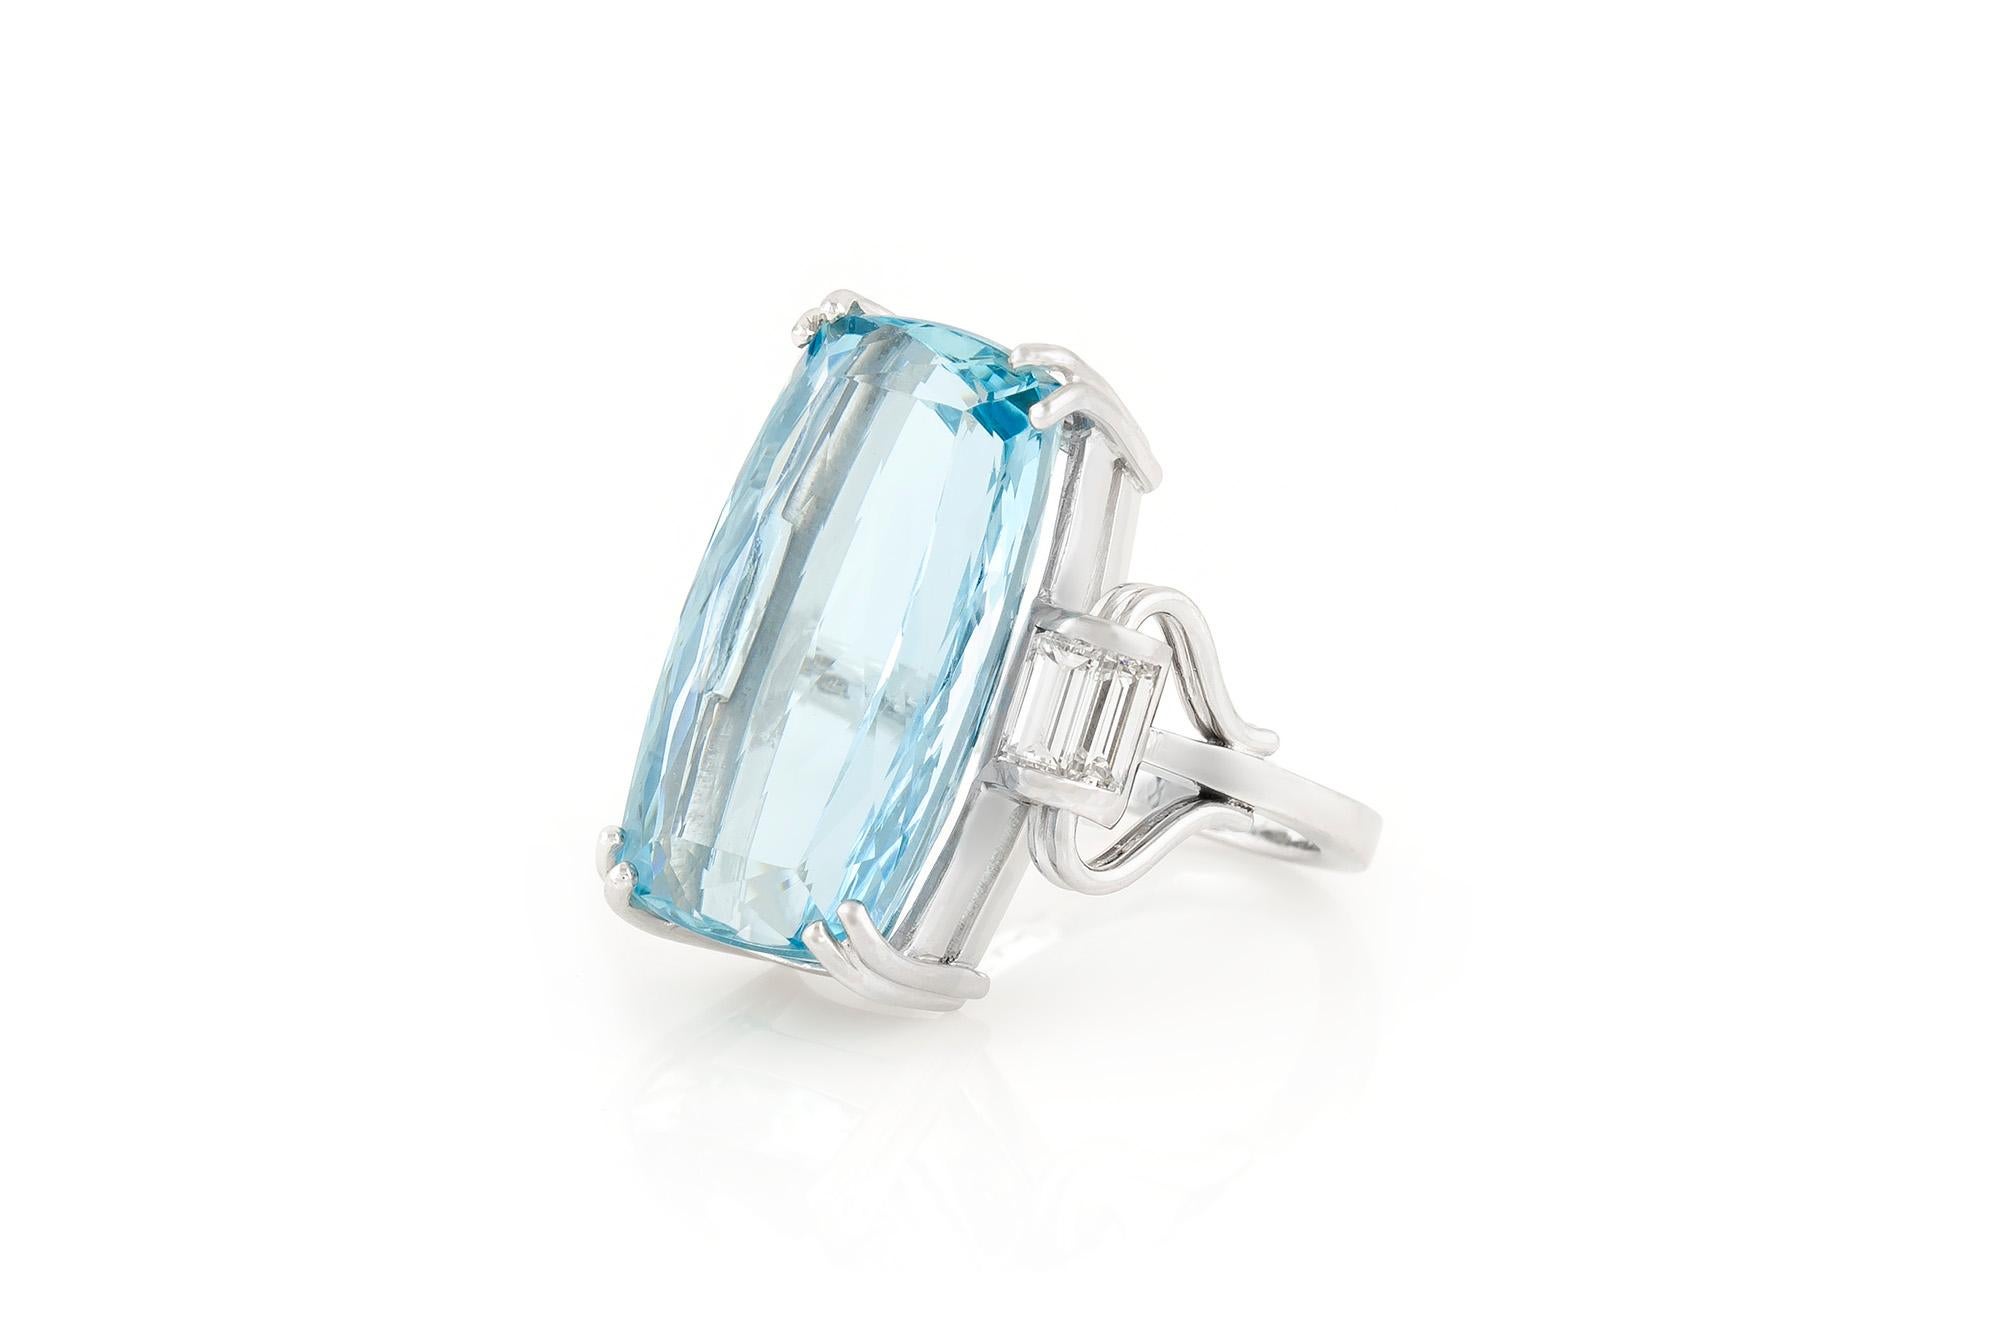 Finely crafted in 18k white gold with a cushion cut Aquamarine weighing approximately 30.00 carats.
The ring features 4 baguette cut side diamonds weighing approximately a total of 1.00 carat.
Art Deco, circa 1930s.
Size 6 1/2, resizable